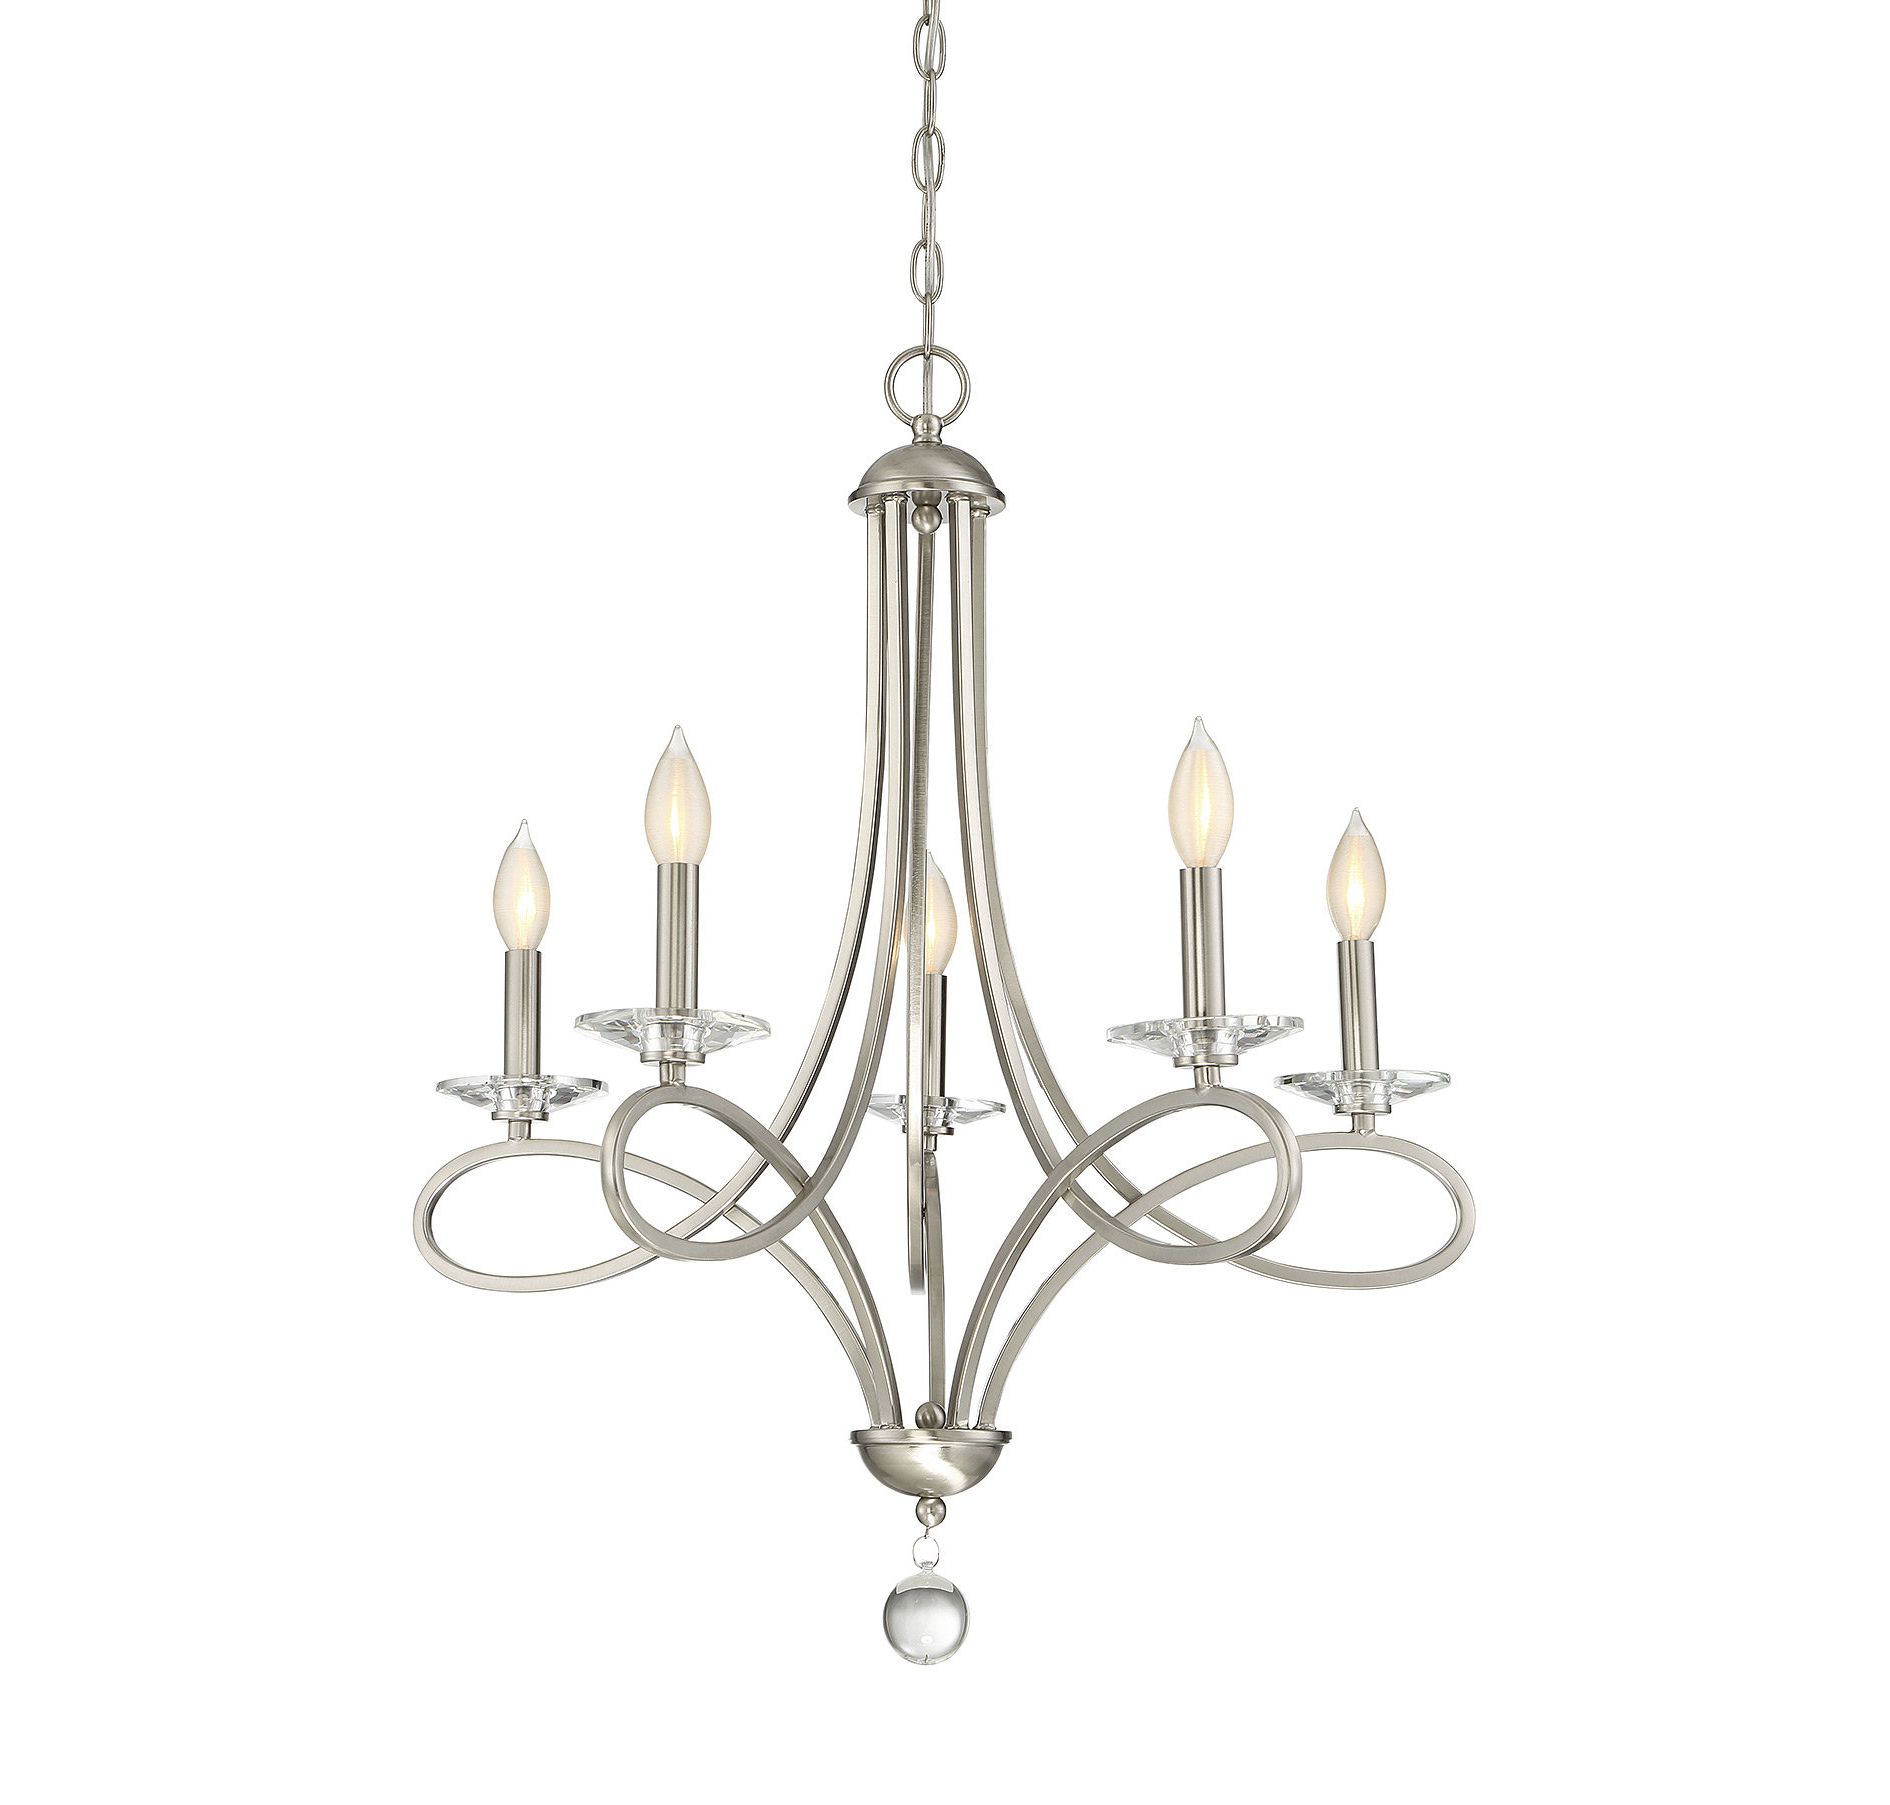 Willa Arlo Interiors Berger 5 Light Candle Style Chandelier Intended For Newest Berger 5 Light Candle Style Chandeliers (View 2 of 25)